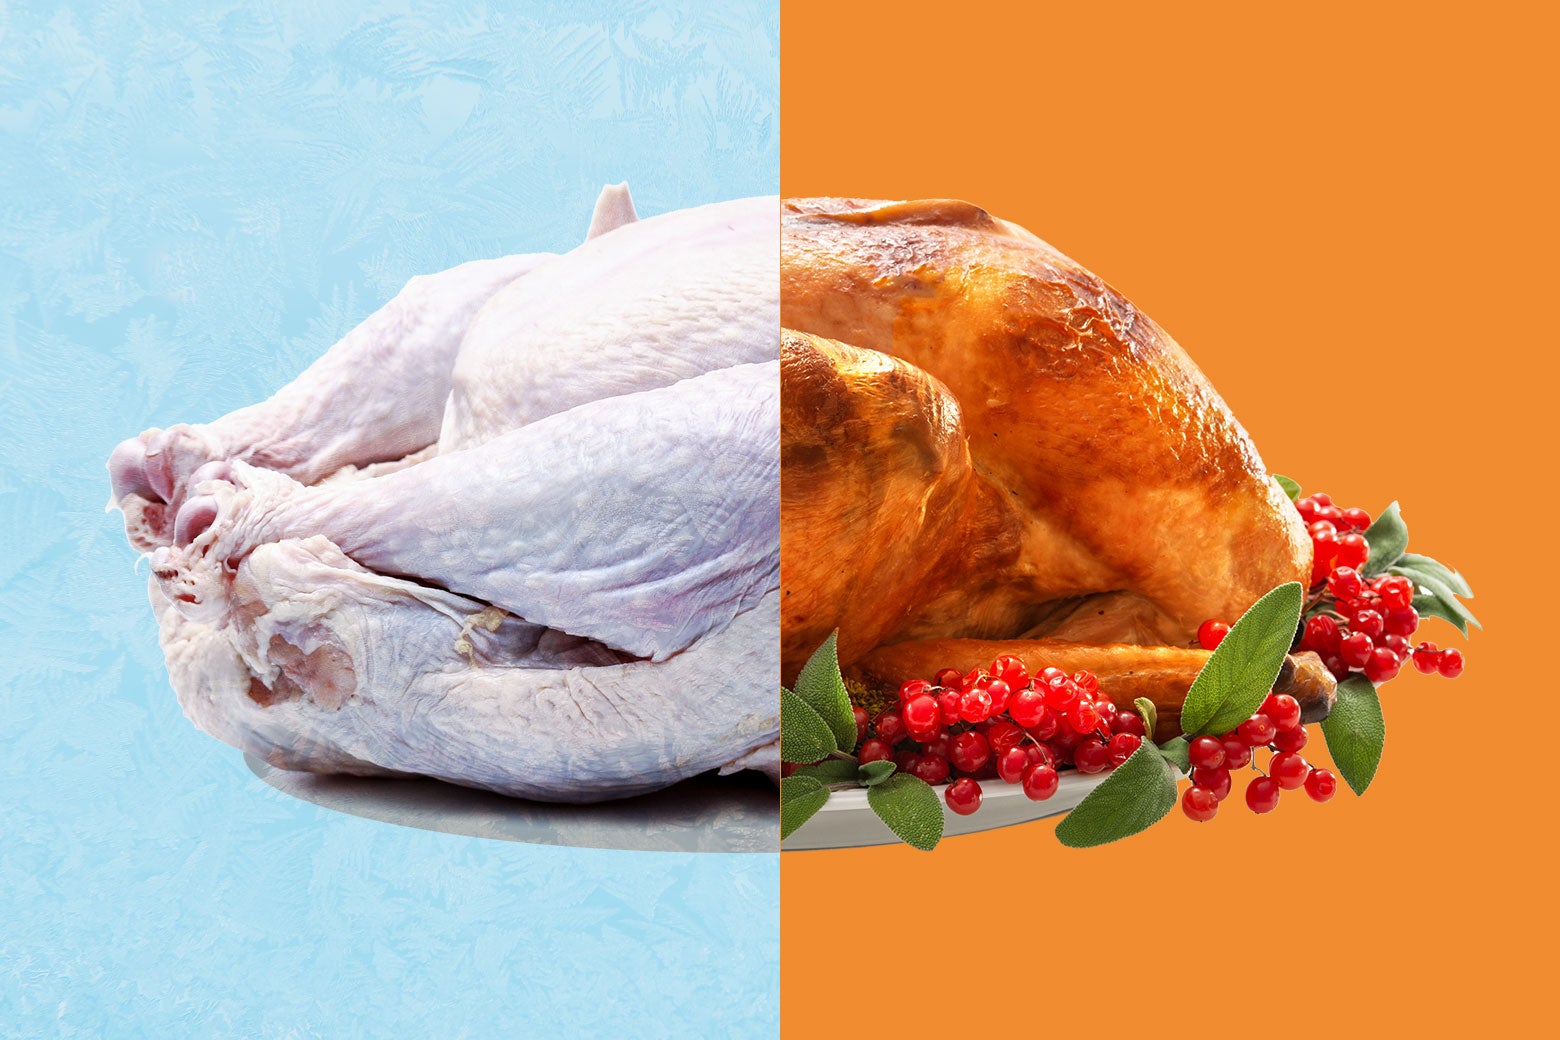 A before/after image of one turkey: the precooked, frozen, unthawed bird, then the beautifully burnished roasted bird on a serving platter, with a garnish of cranberry sprigs.